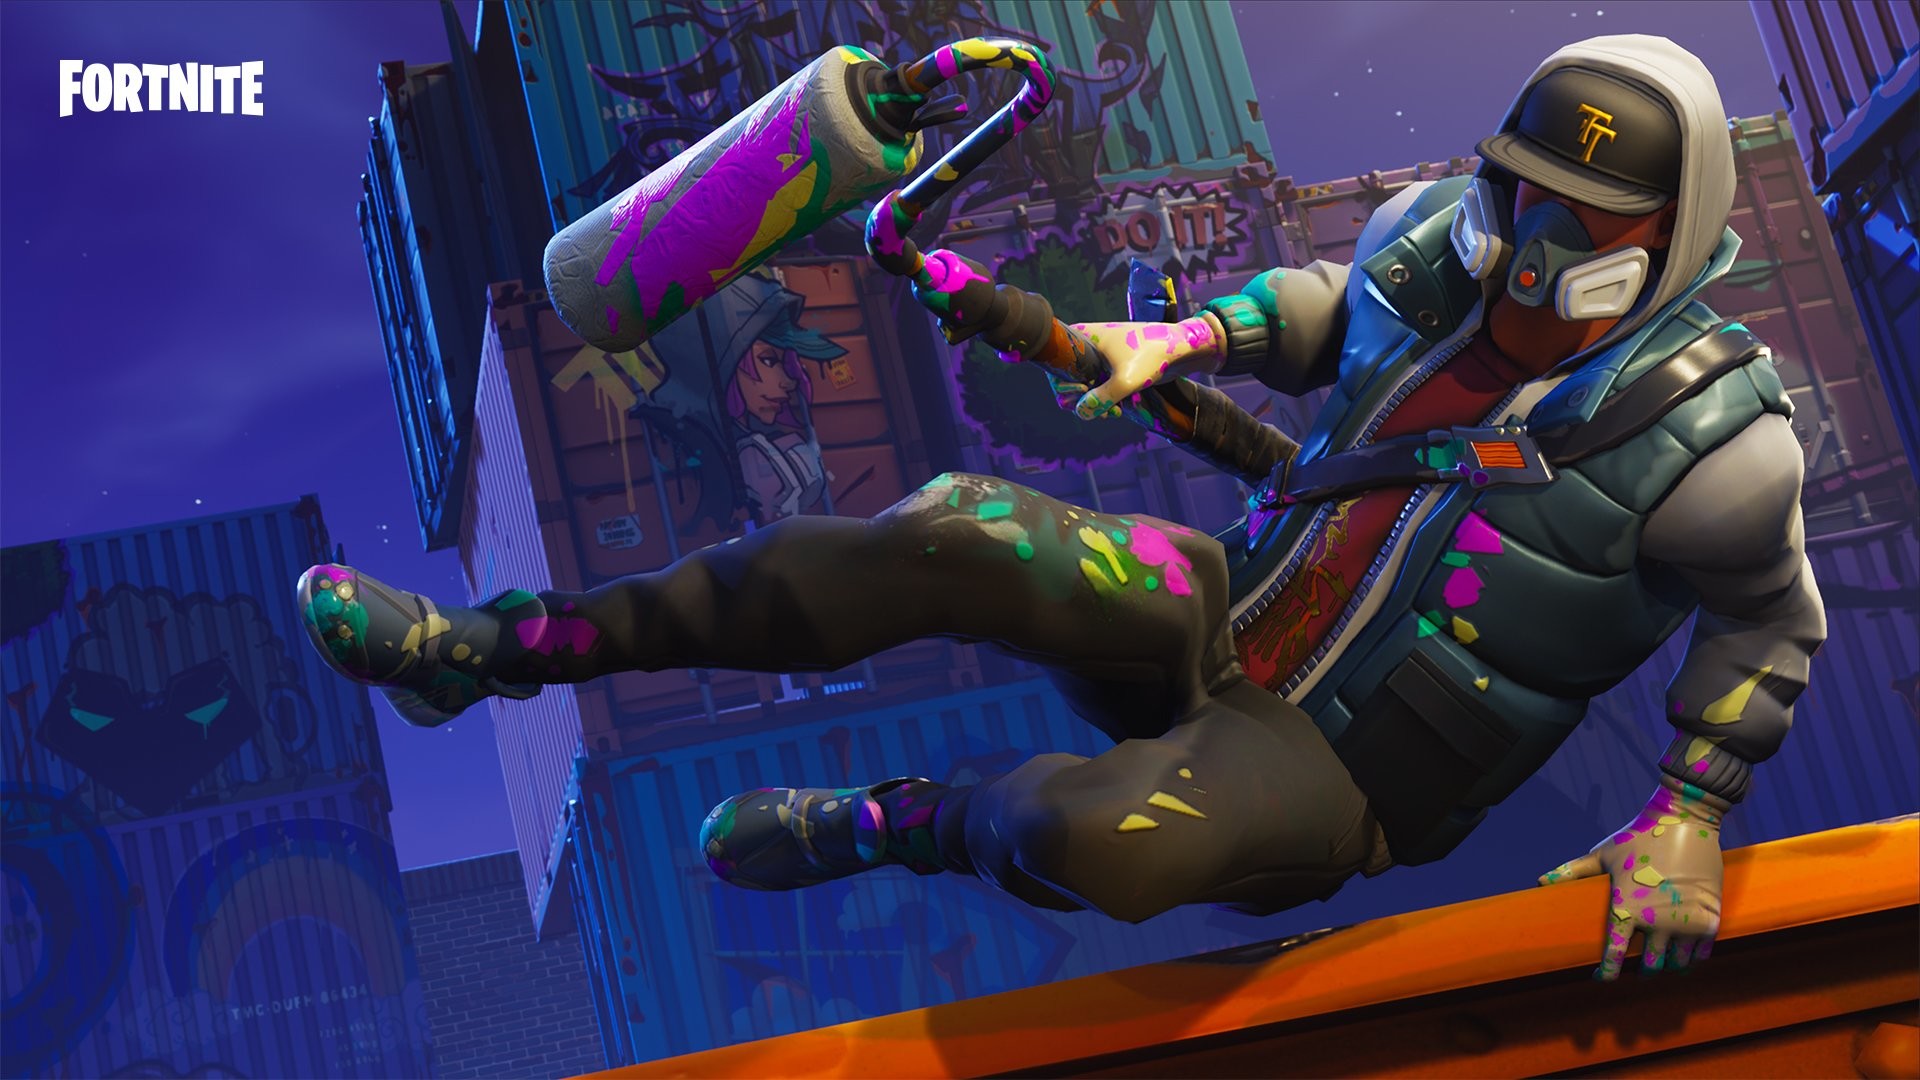 The latest update to Fortnite adds a new ability to the game - Fortnite